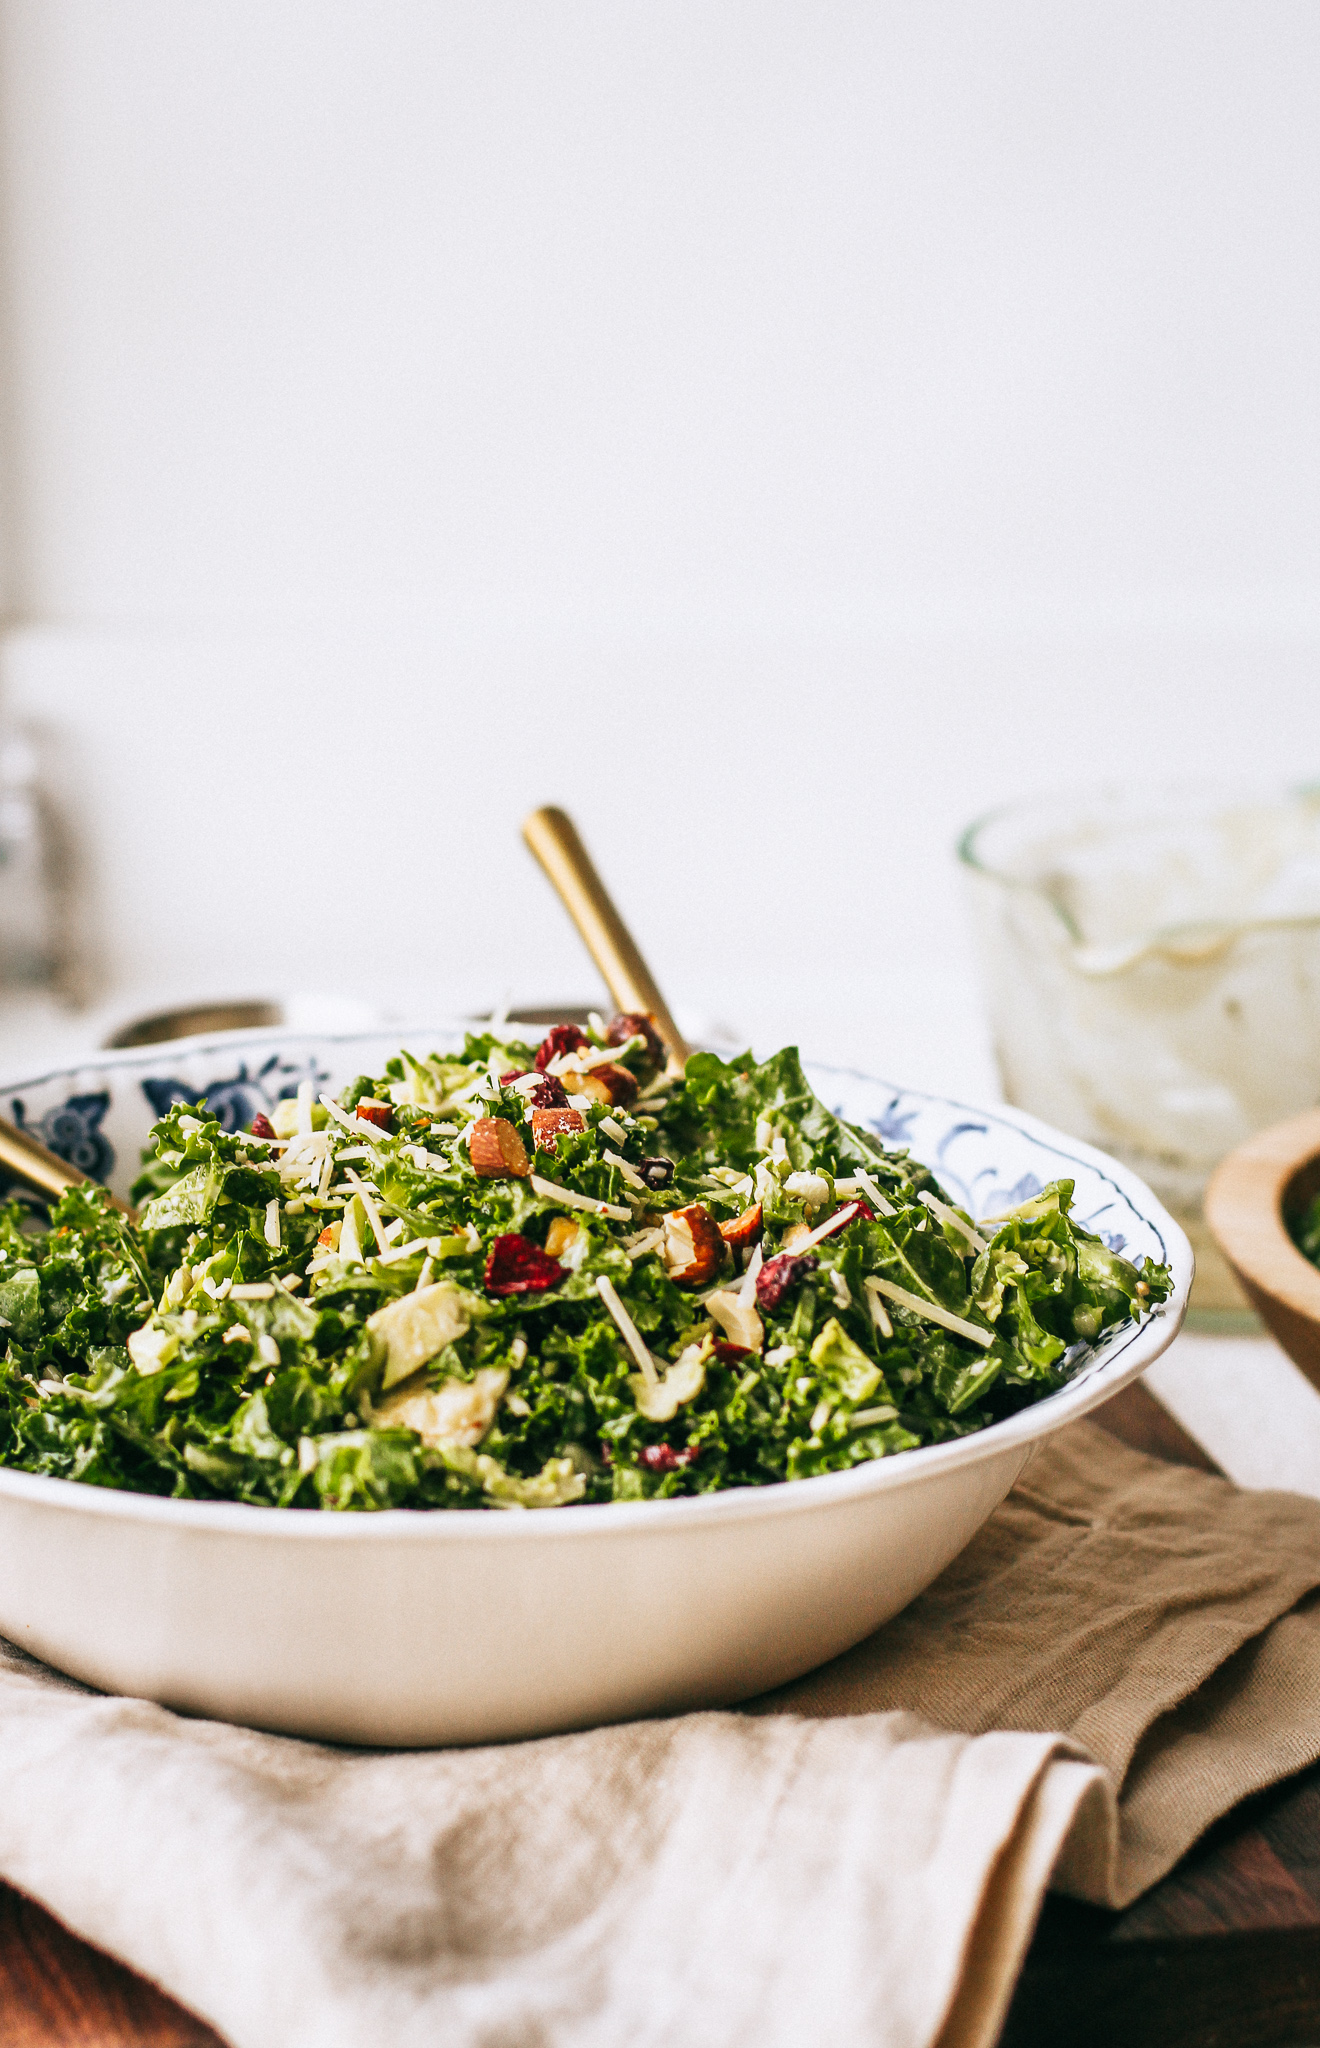 Best Brussels Sprout and Kale Salad